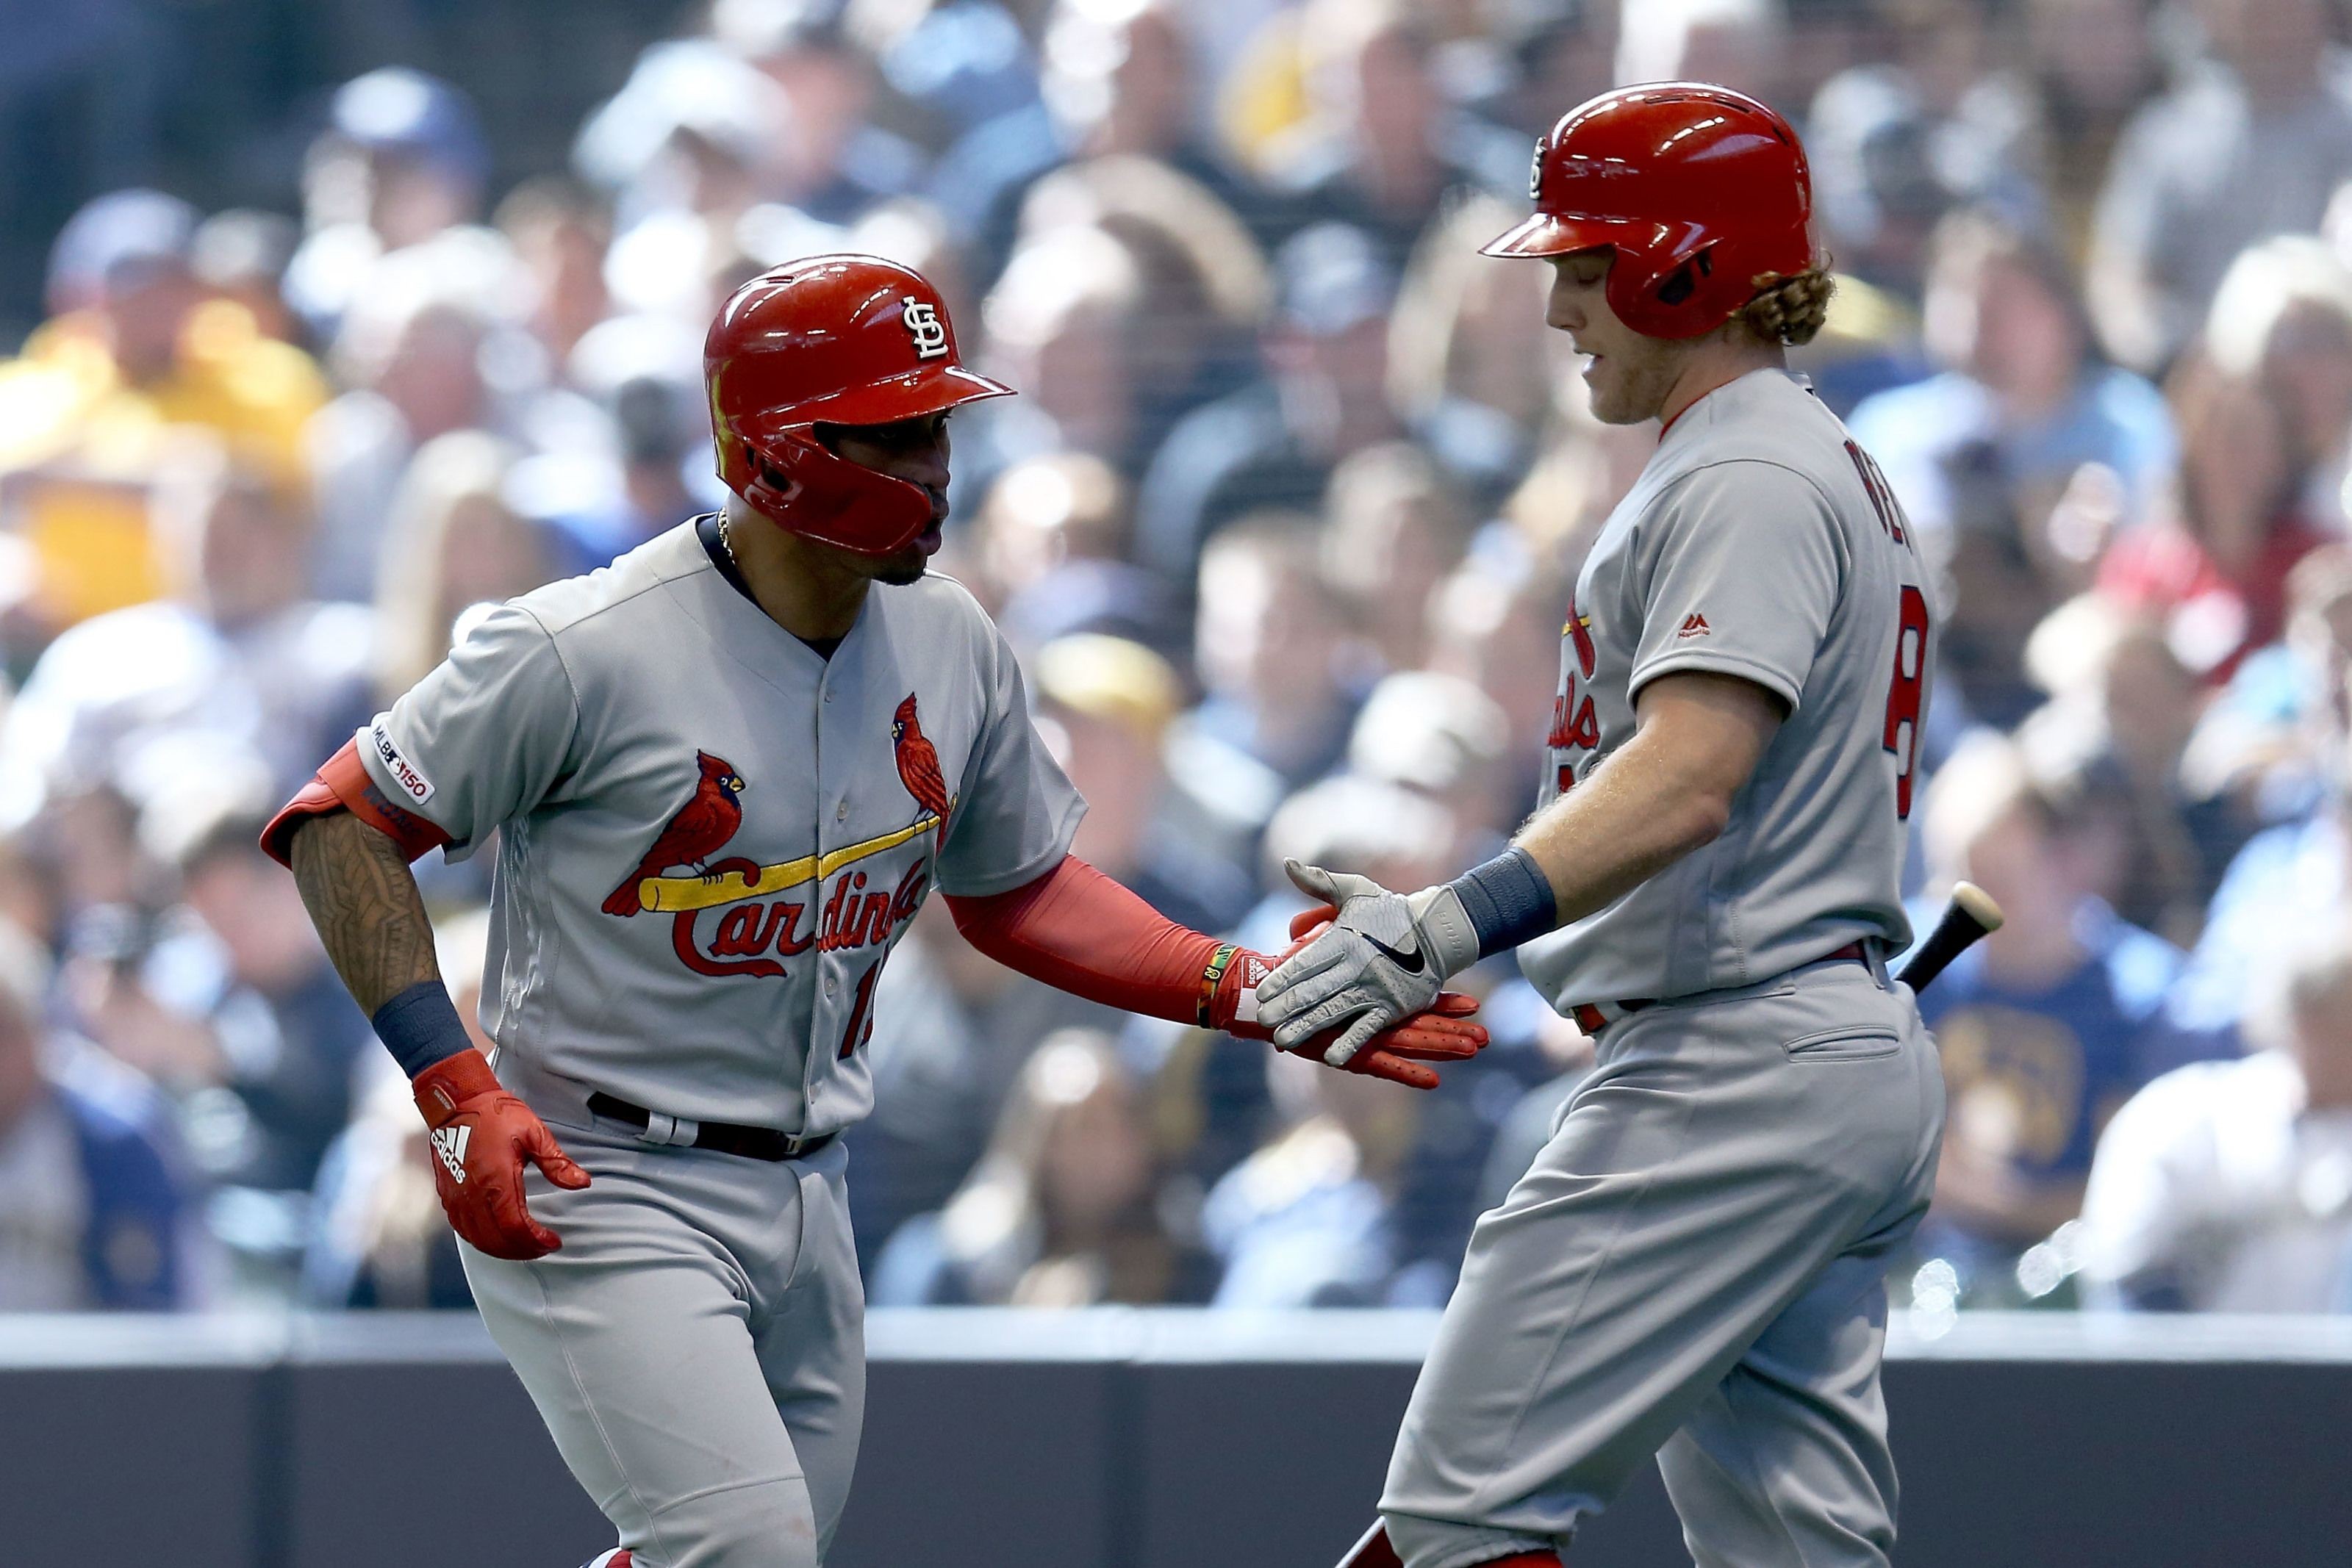 St. Louis Cardinals Opening Day reactions after a tough loss